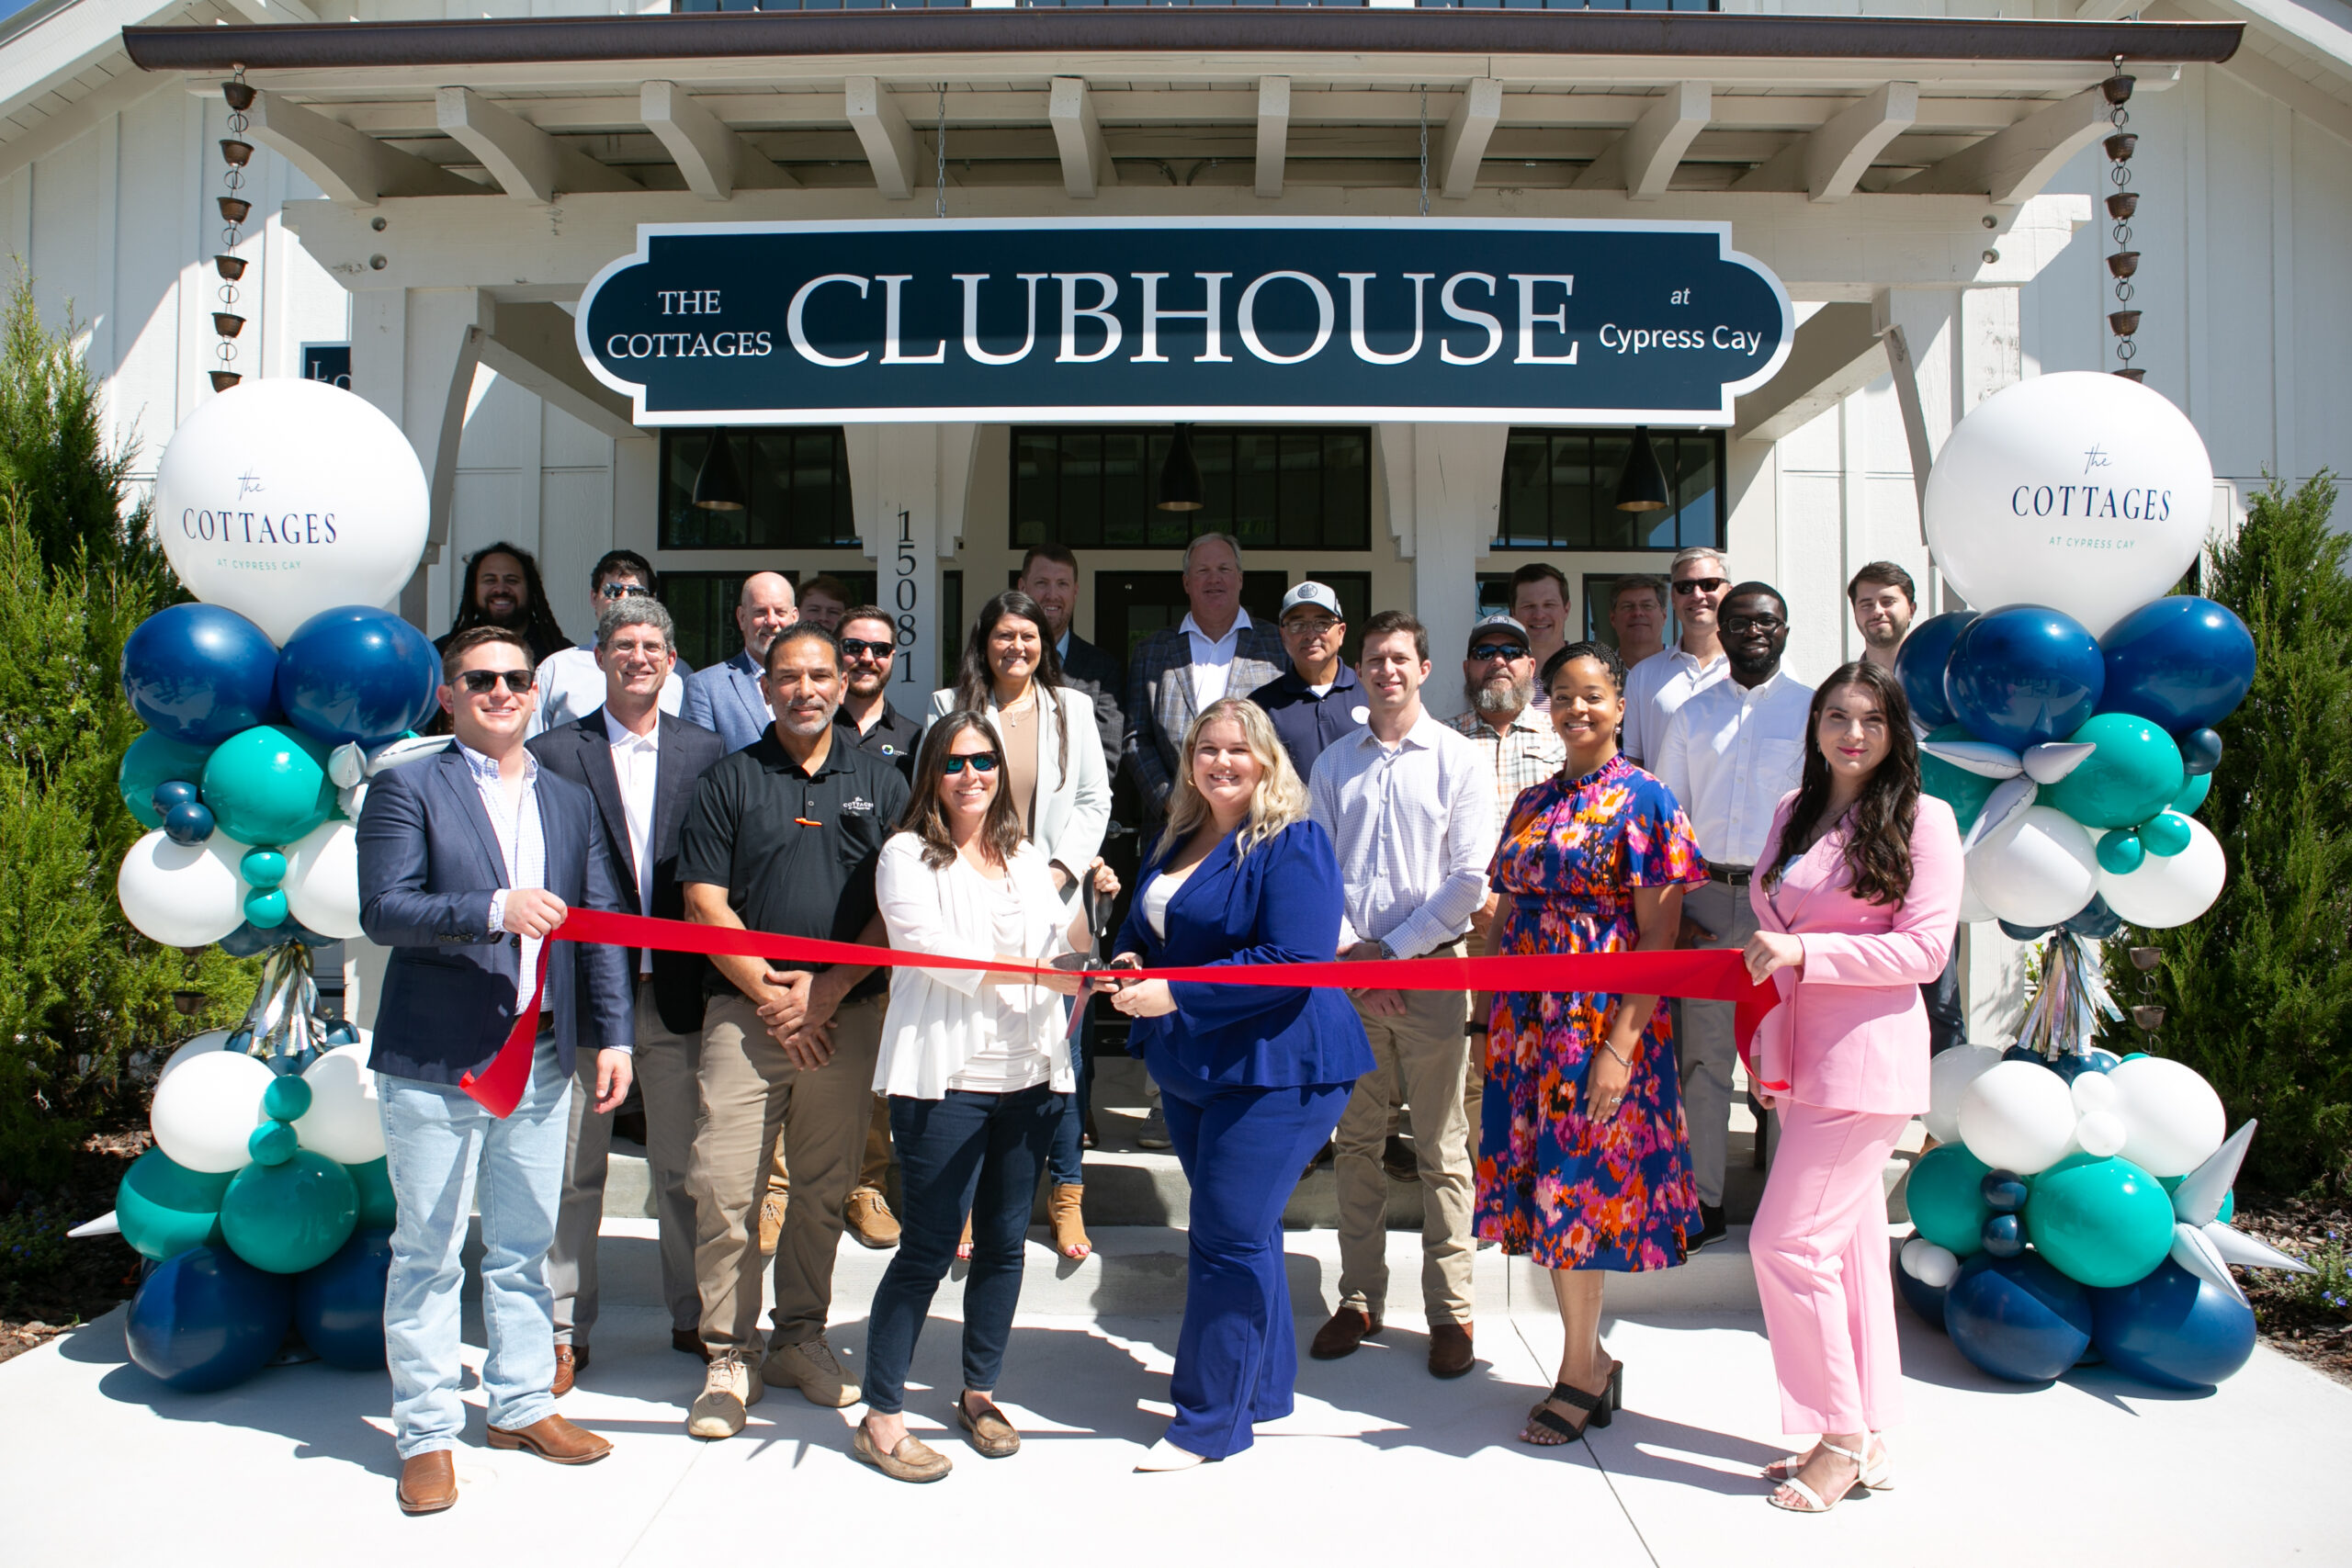 Capstone Communities Cuts Ribbon at The Cottages at Cypress Cay